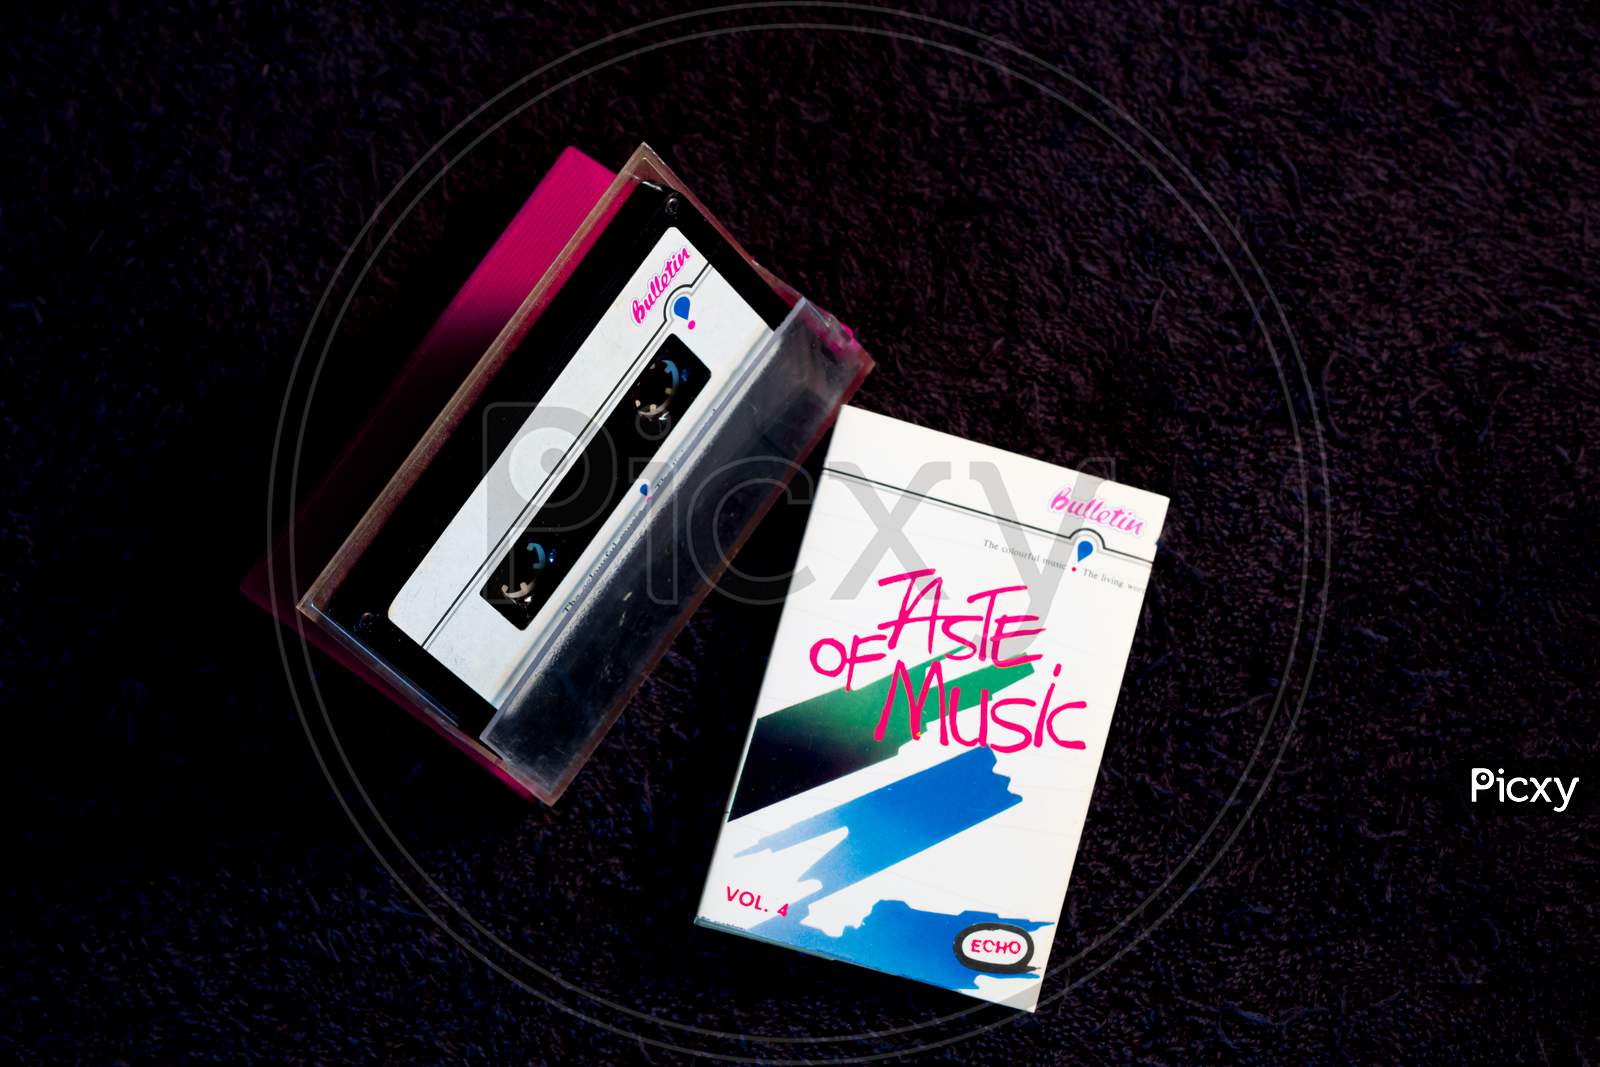 A Pretty picture of a Music Audio Cassette tape with its case against the Black background with a natural light source.